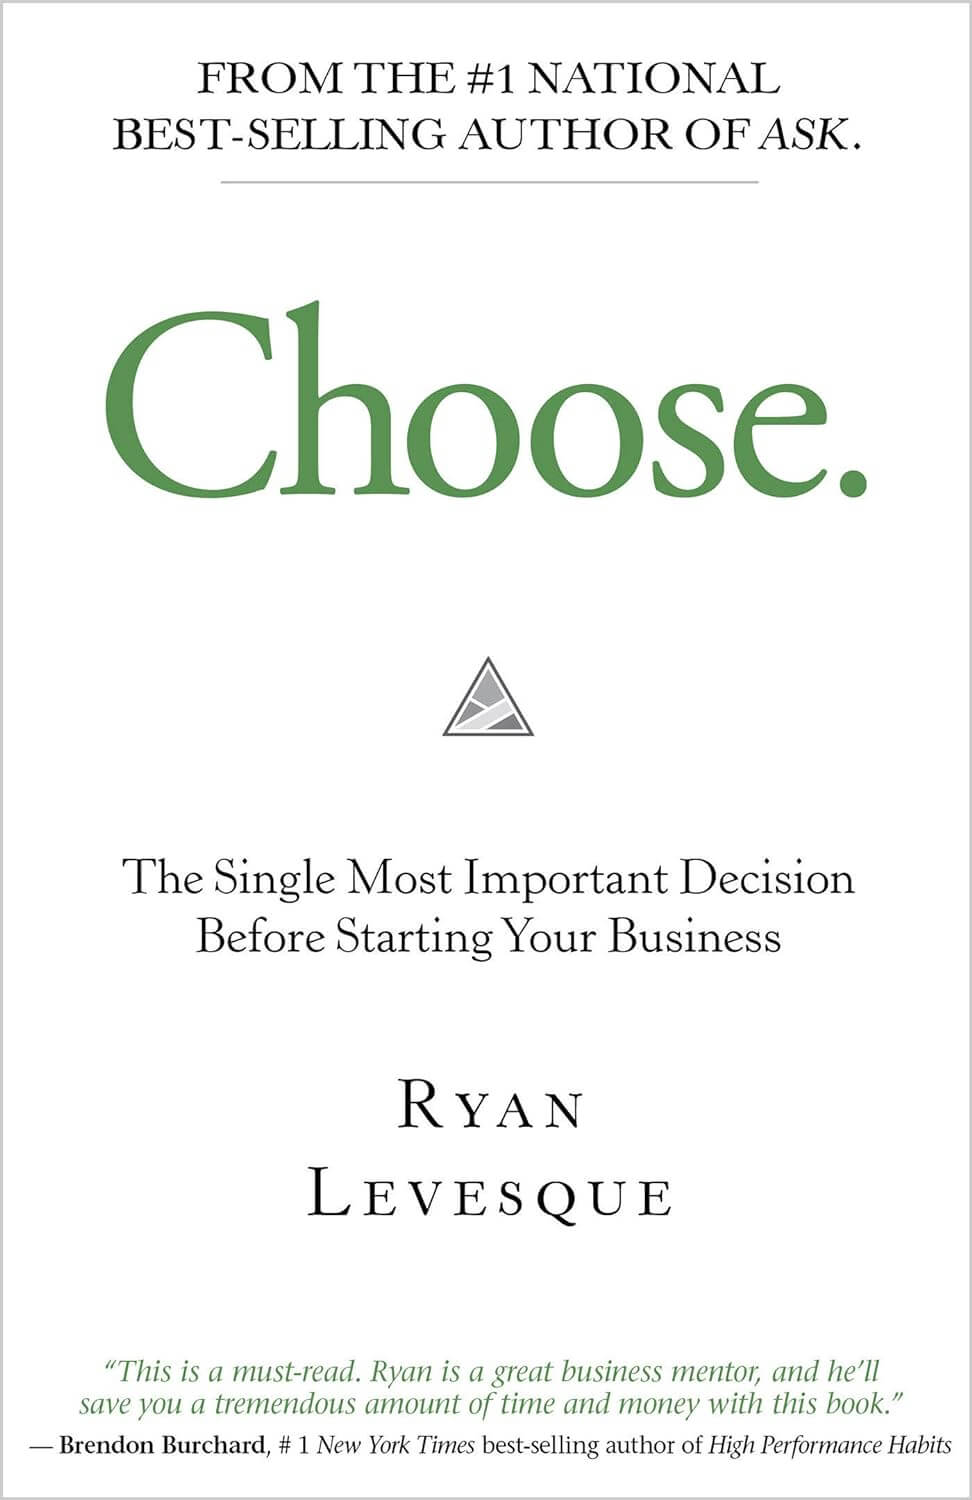 The Single Most Important Decision Before Starting Your Business by Ryan Levesque